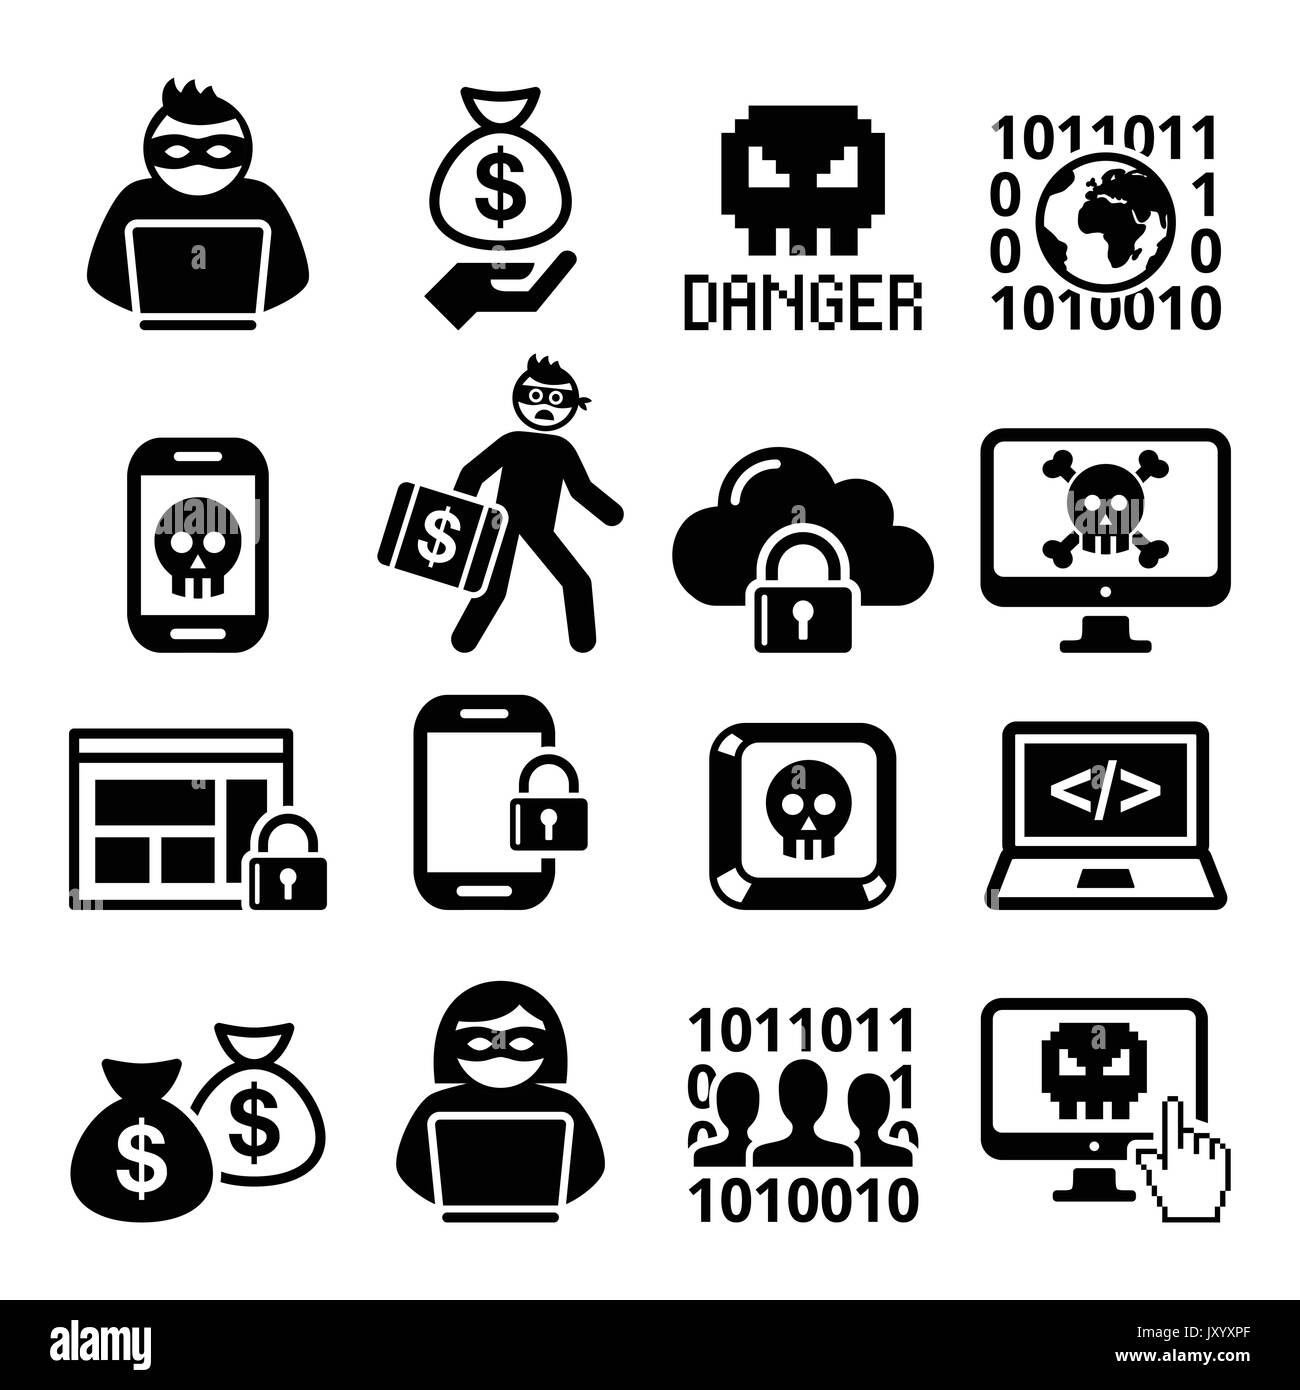 Hacker, cyber attack, cyber crime icons set Stock Vector